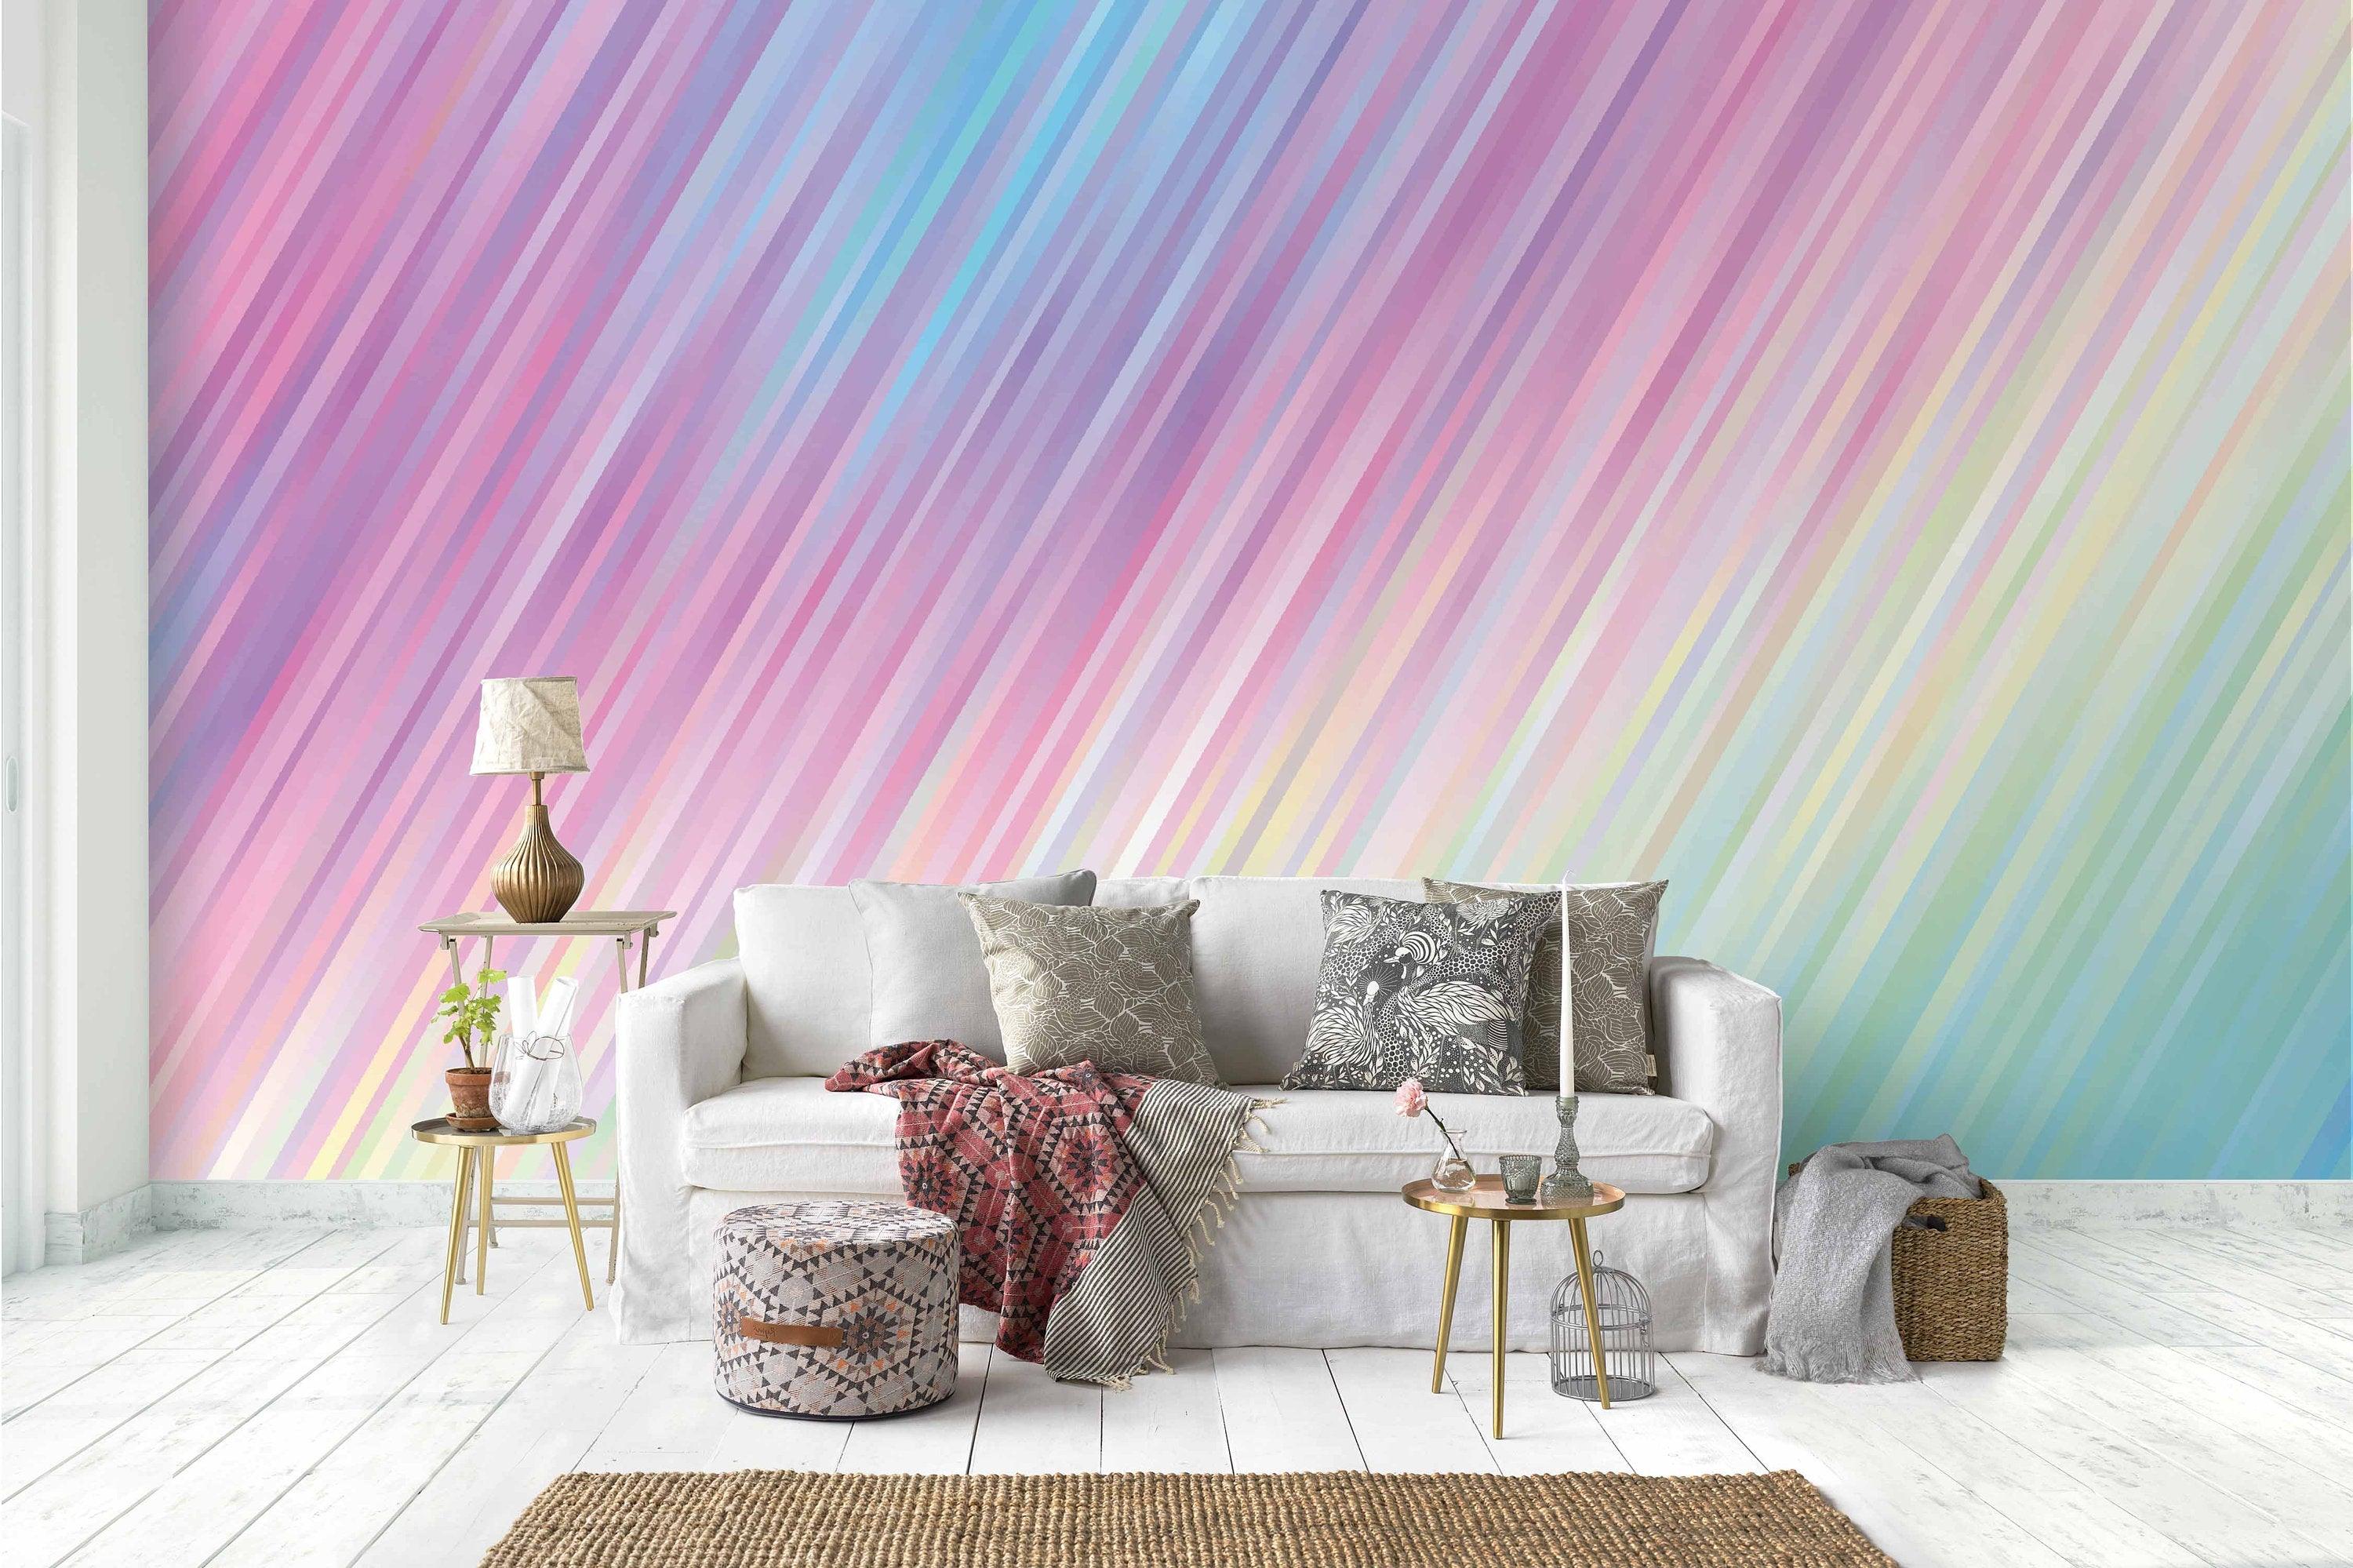 3D Psychedelic Color, Shiny Lines Texture, Pastel Rainbow Wallpaper,Removable Self Adhesive Wallpaper,Wall Mural,Vintage art,Peel and Stick- Jess Art Decoration